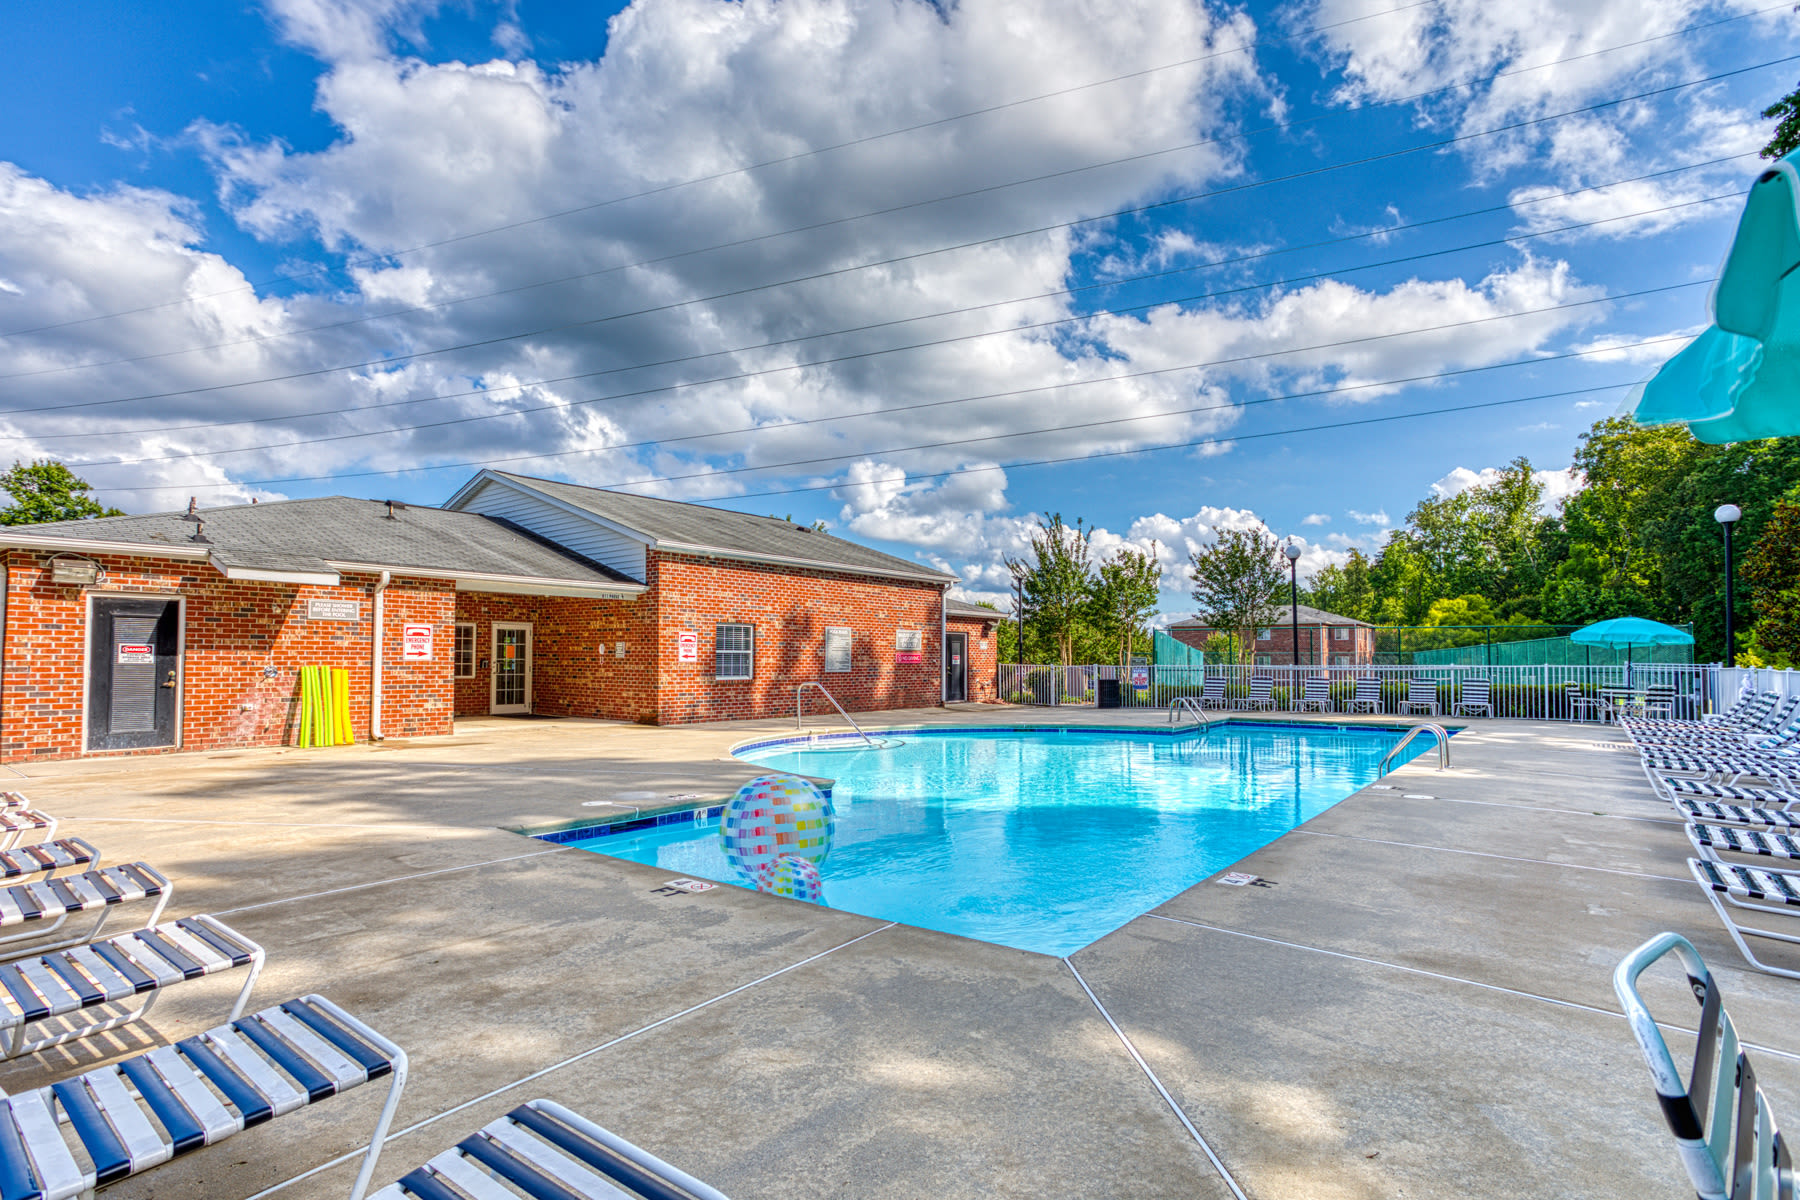 Swimming pool at Copper Mill Village in High Point, North Carolina